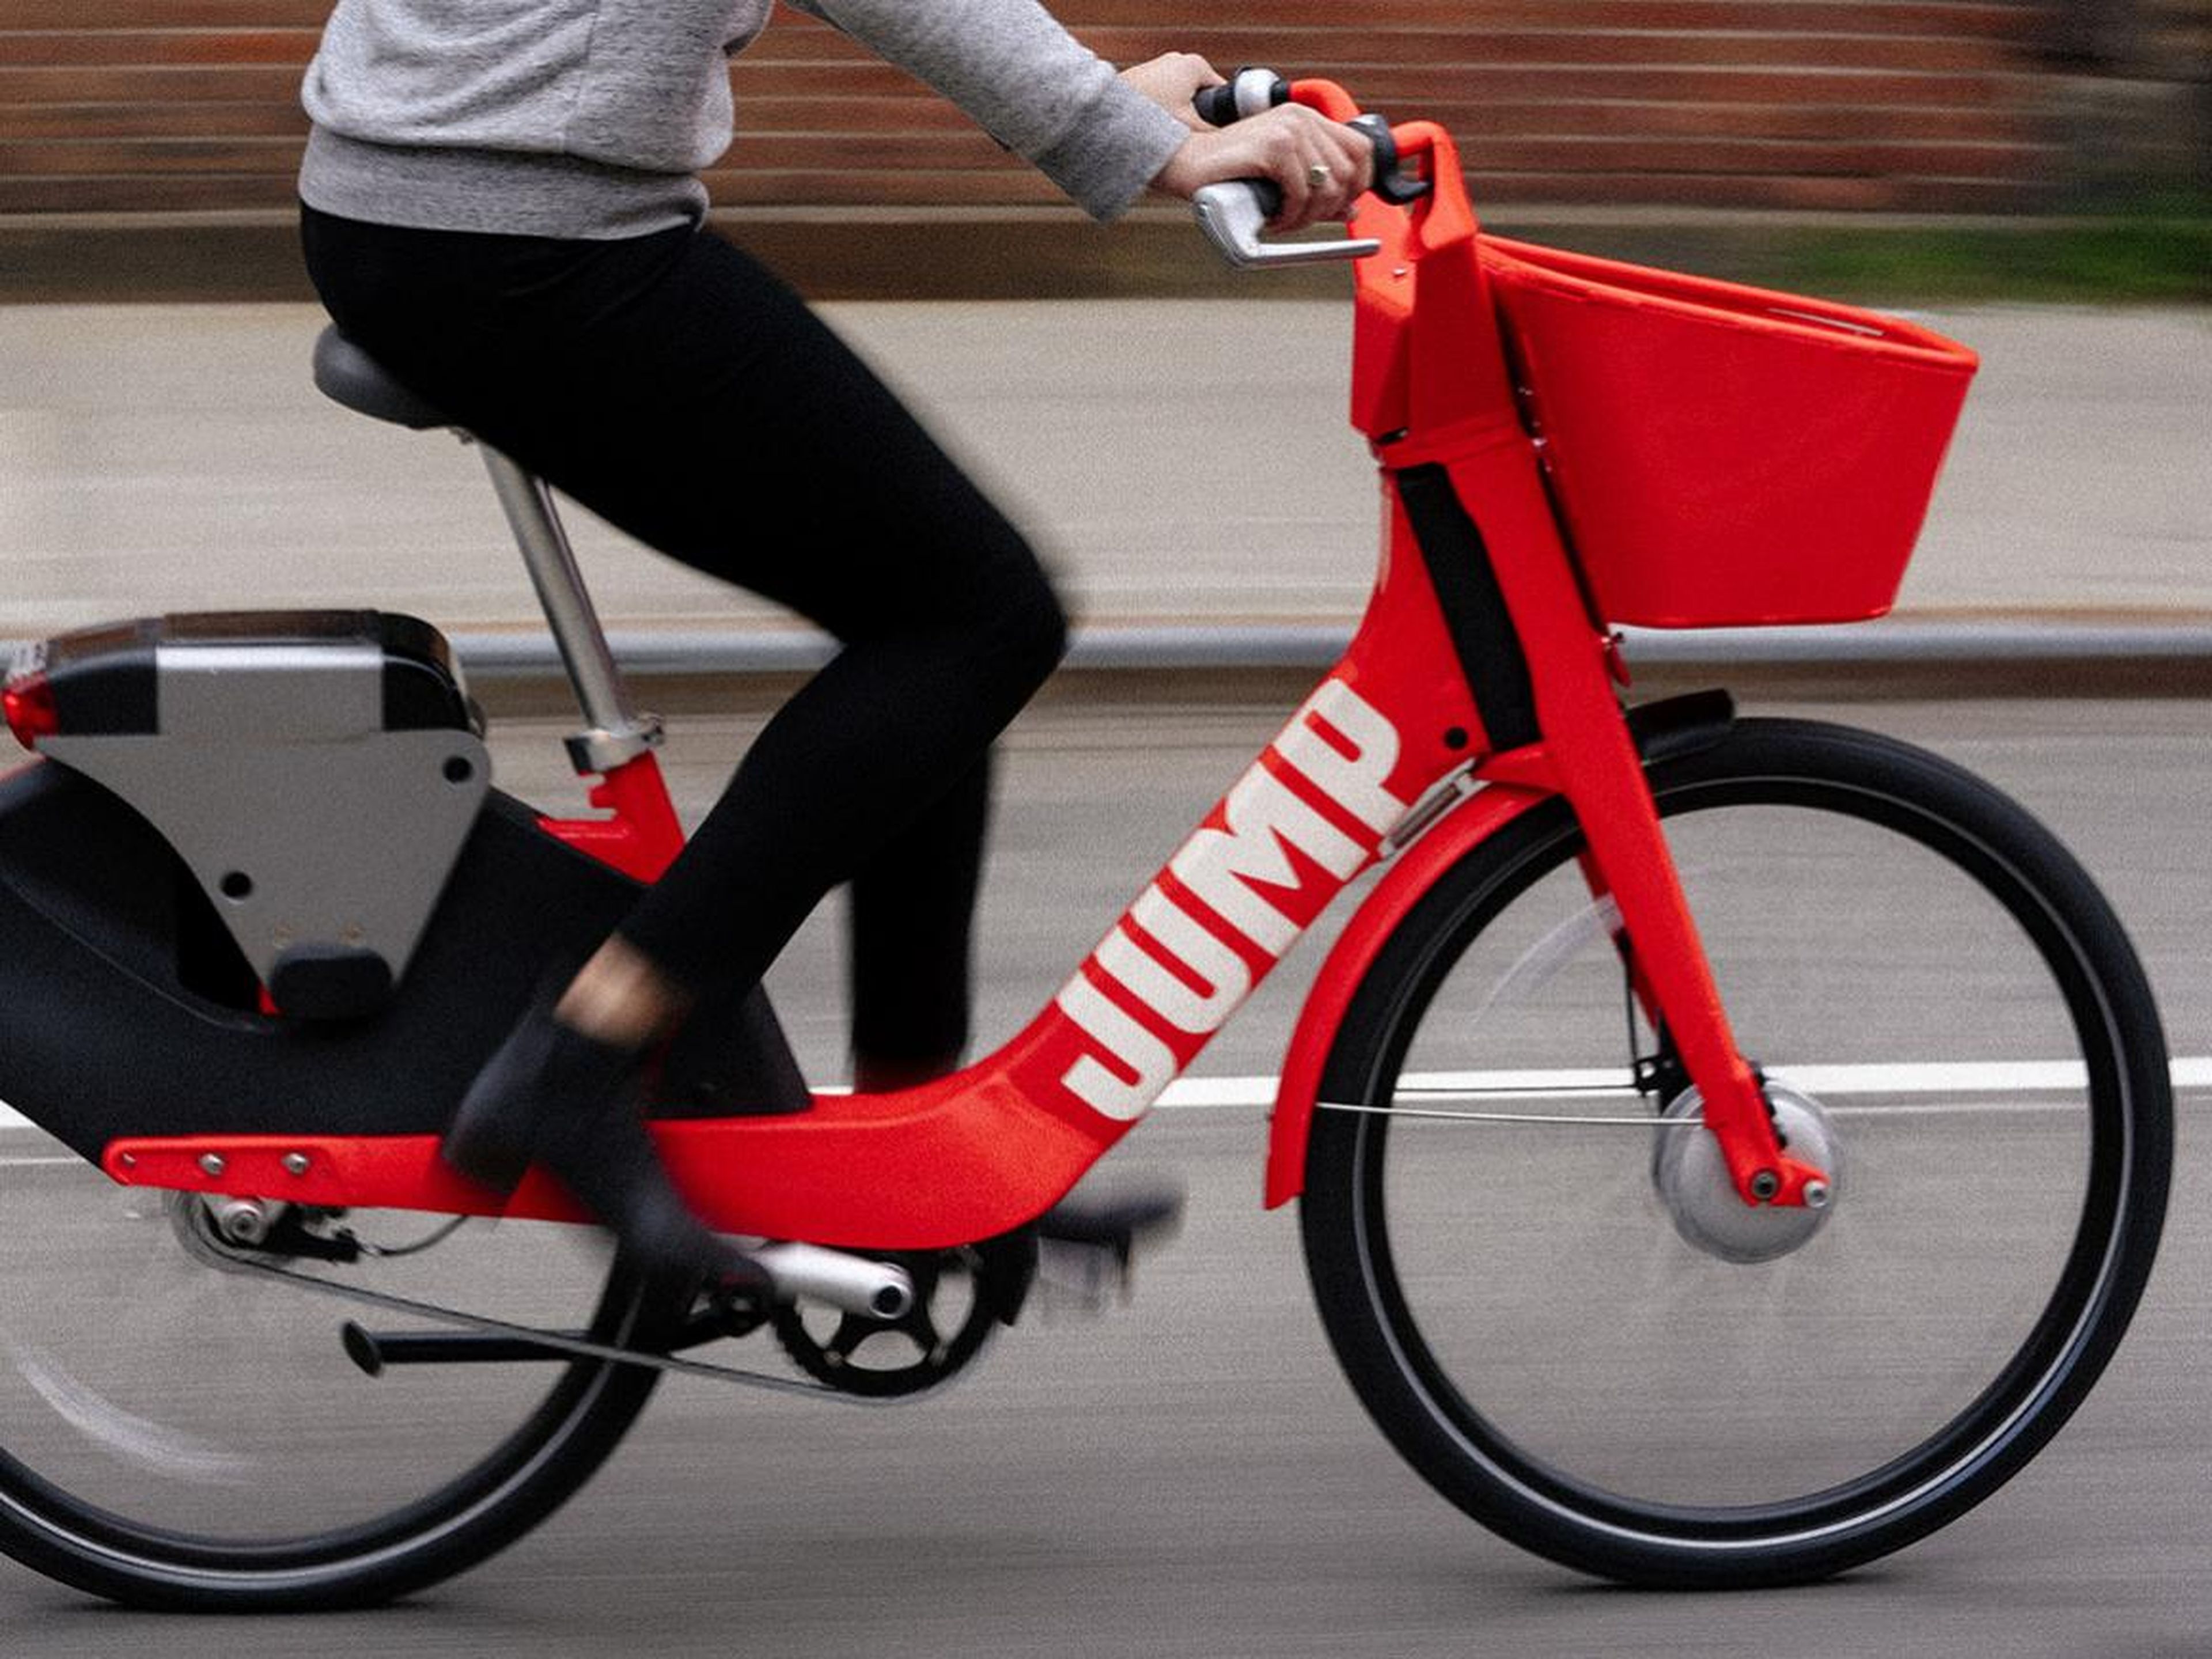 Uber will focus on ebikes and scooters over cars for shorter journeys